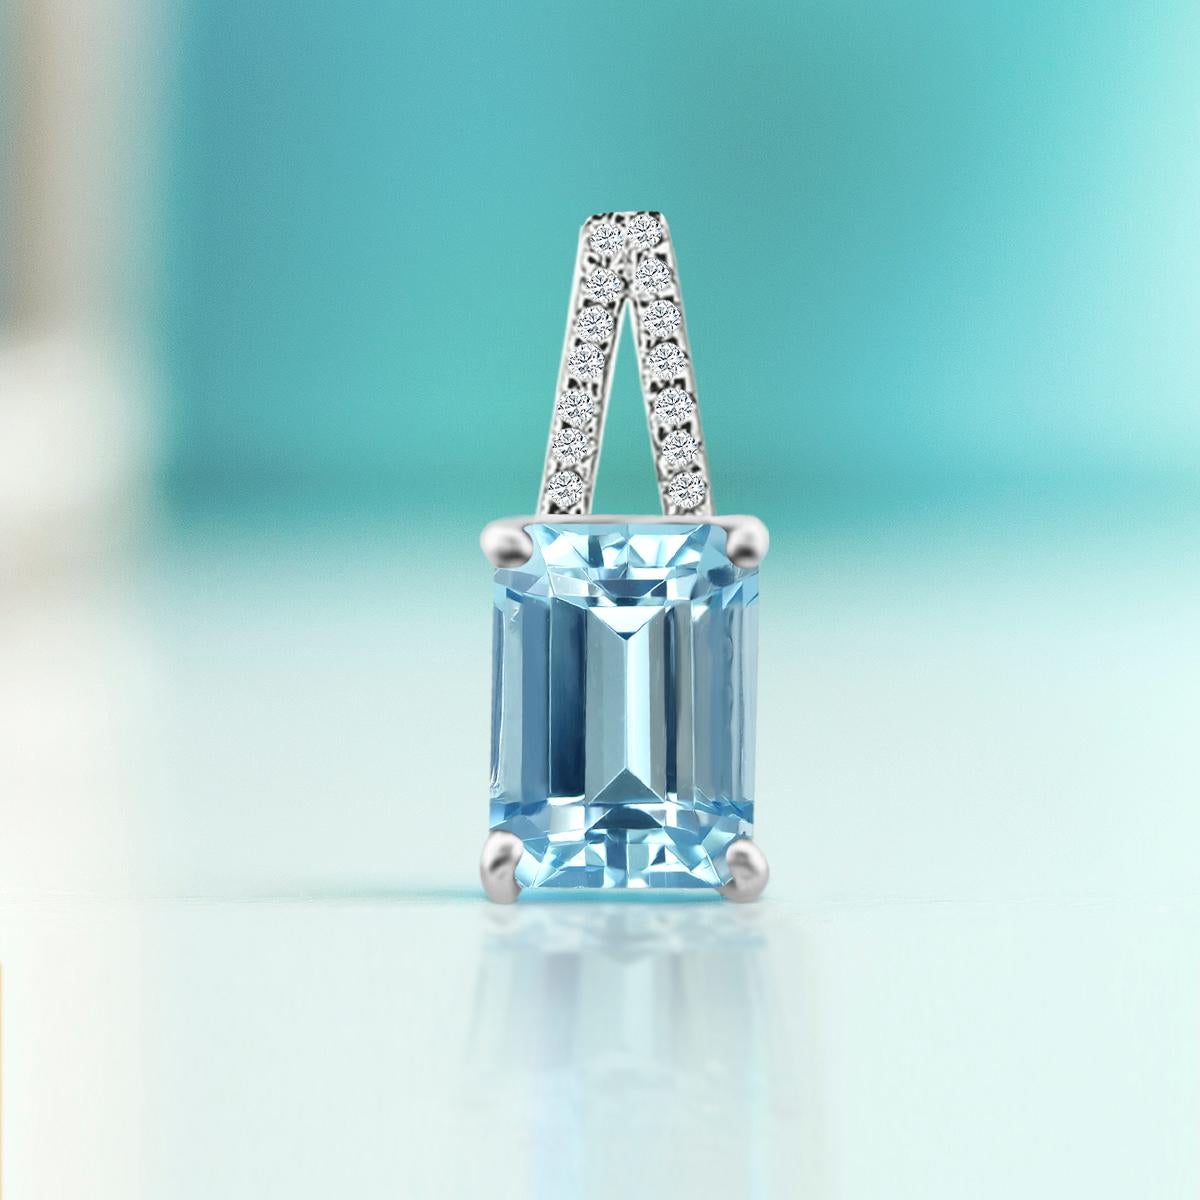 Softly Sparkle With The Icy-Blue Beauty Of This Octagon Cut 7x5mm Aquamarine Gemstone Pendant, Designed And Nestled In An Elegant Frame Of Round Diamonds.
This Elegant Piece Is Crafted In 14K White Gold.
The Stone Has A Gorgeous Light Blue Color